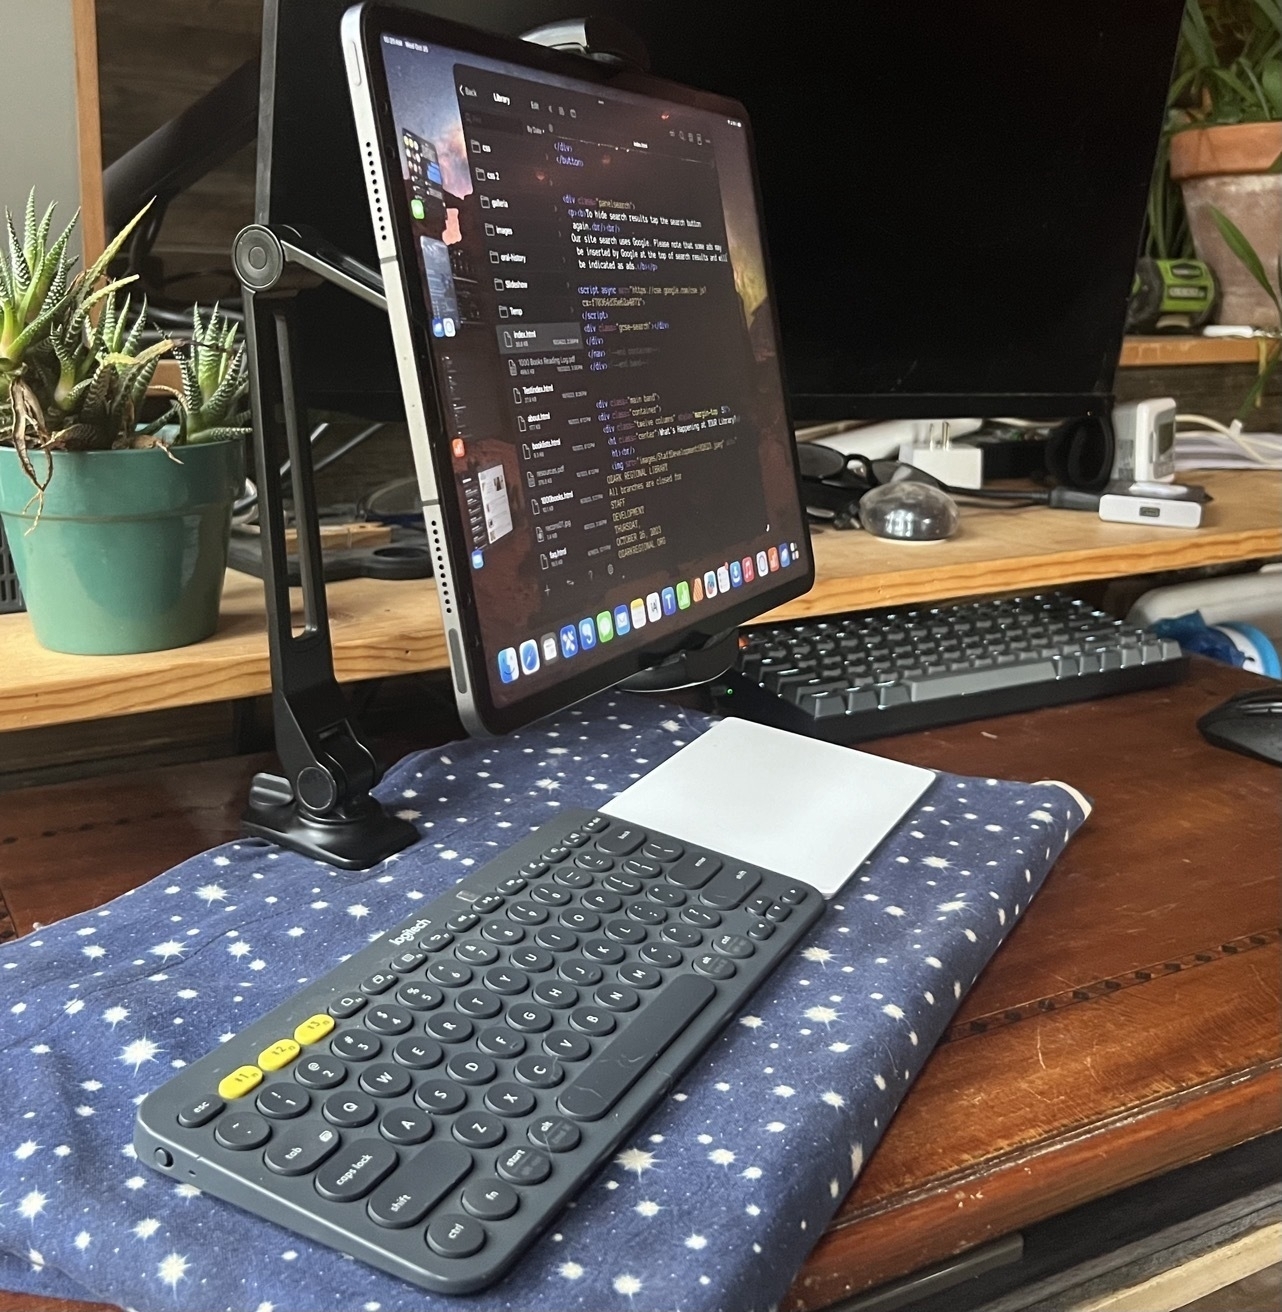 An iPad Pro floats above keyboard and trackpad on a lap desk. The iPad is held up by a configurable arm that is clamped to the back of the wood lap desk. Image taken from the side showing the arm.